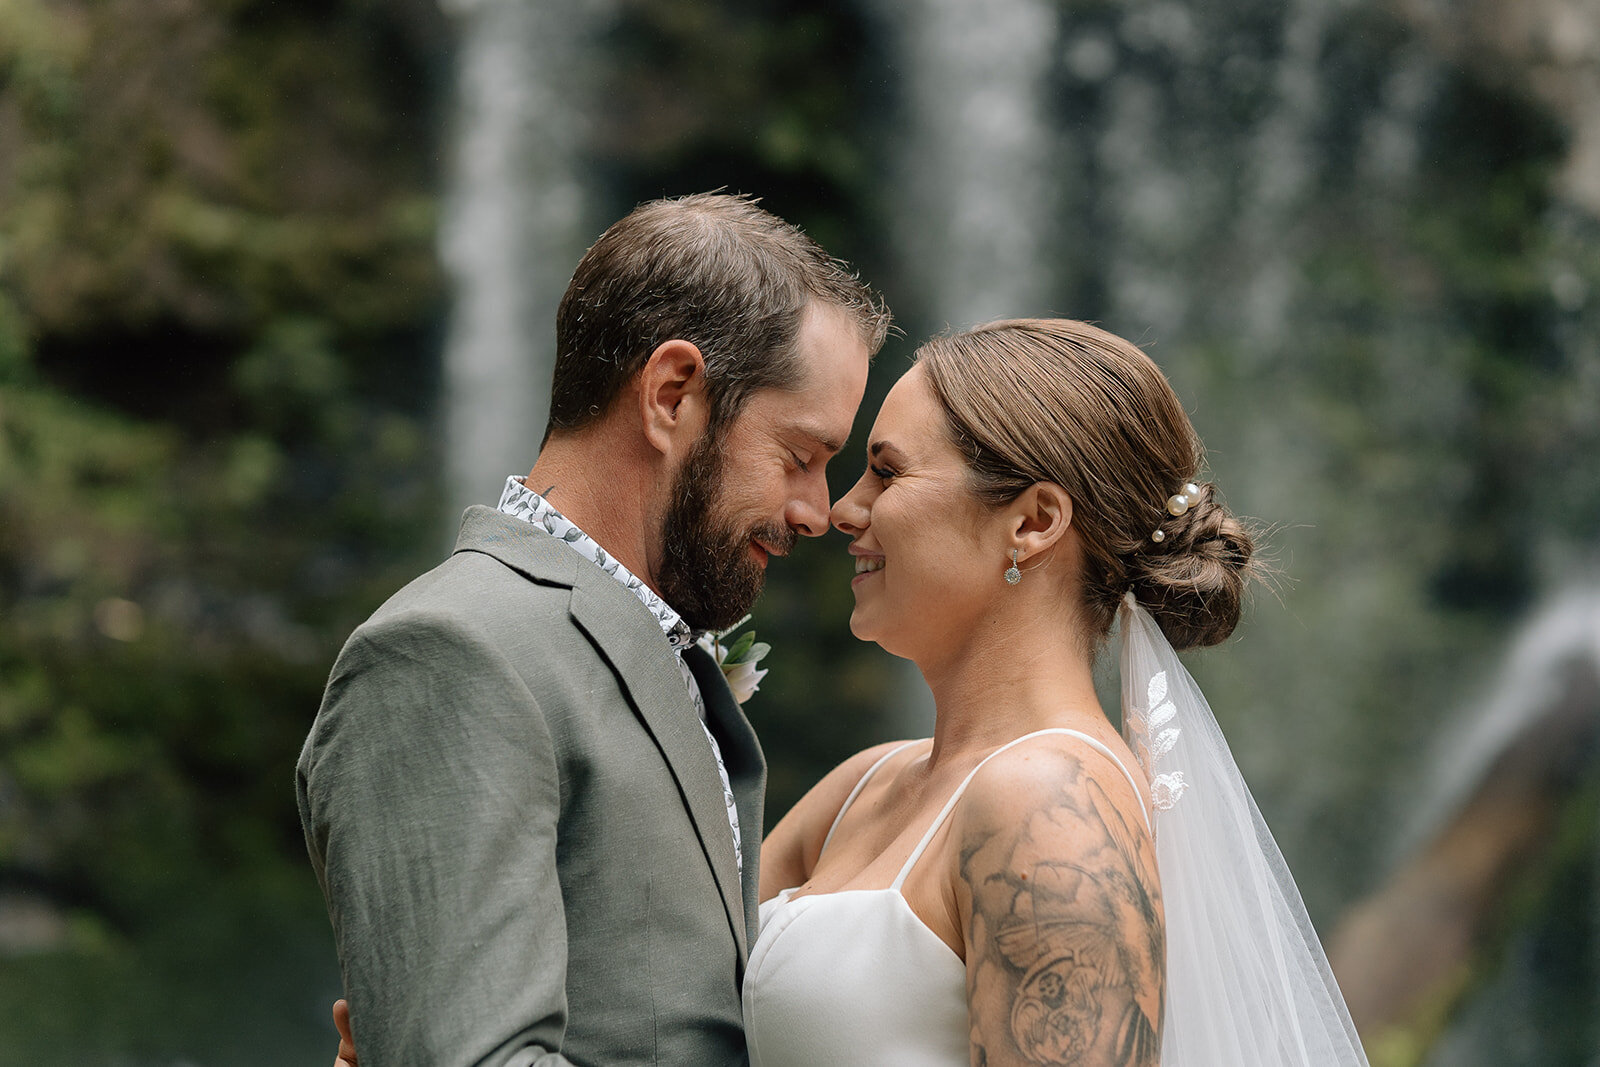 Stacey&Cory-Coast&Pines-254